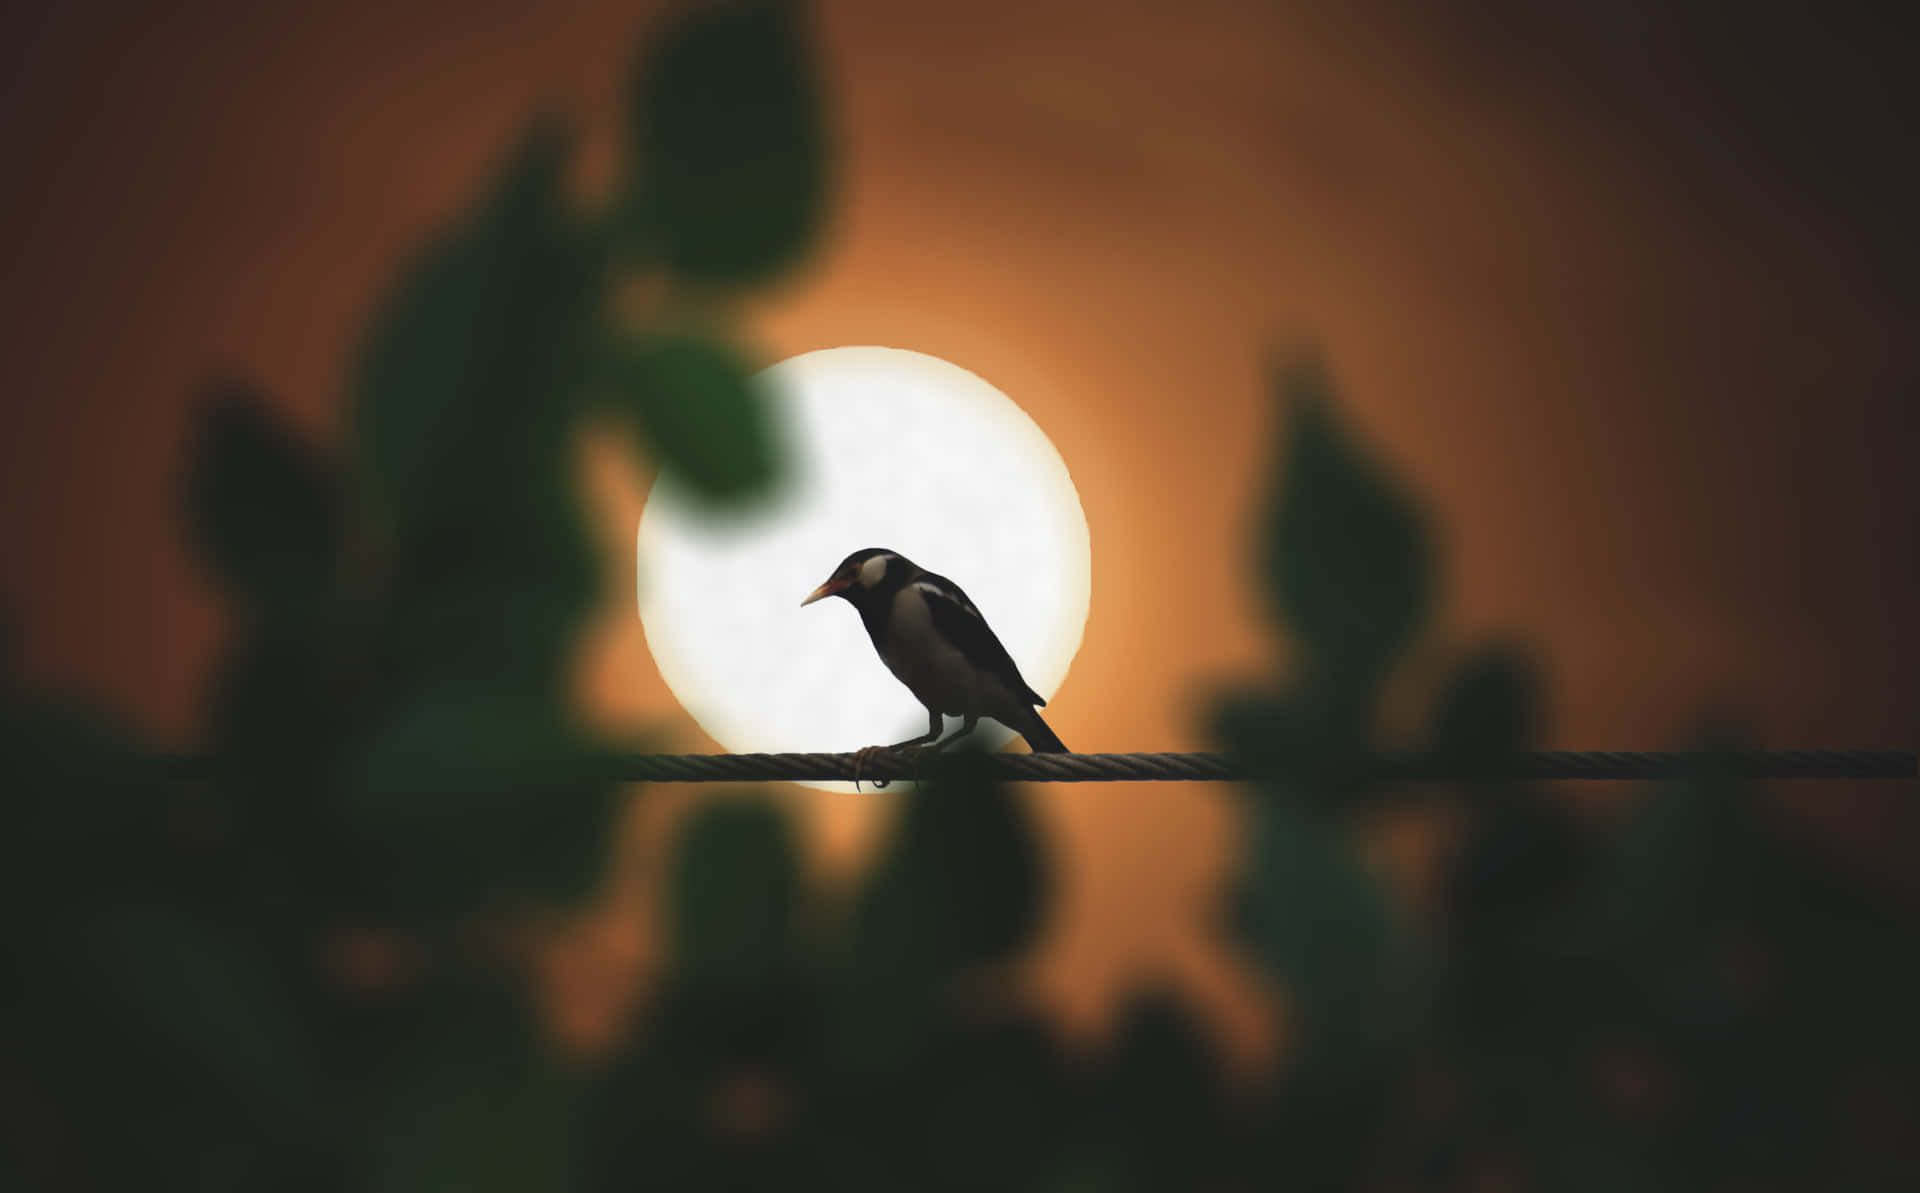 "A Sparrow Sitting on a Fence Looking Out over a Green Field"